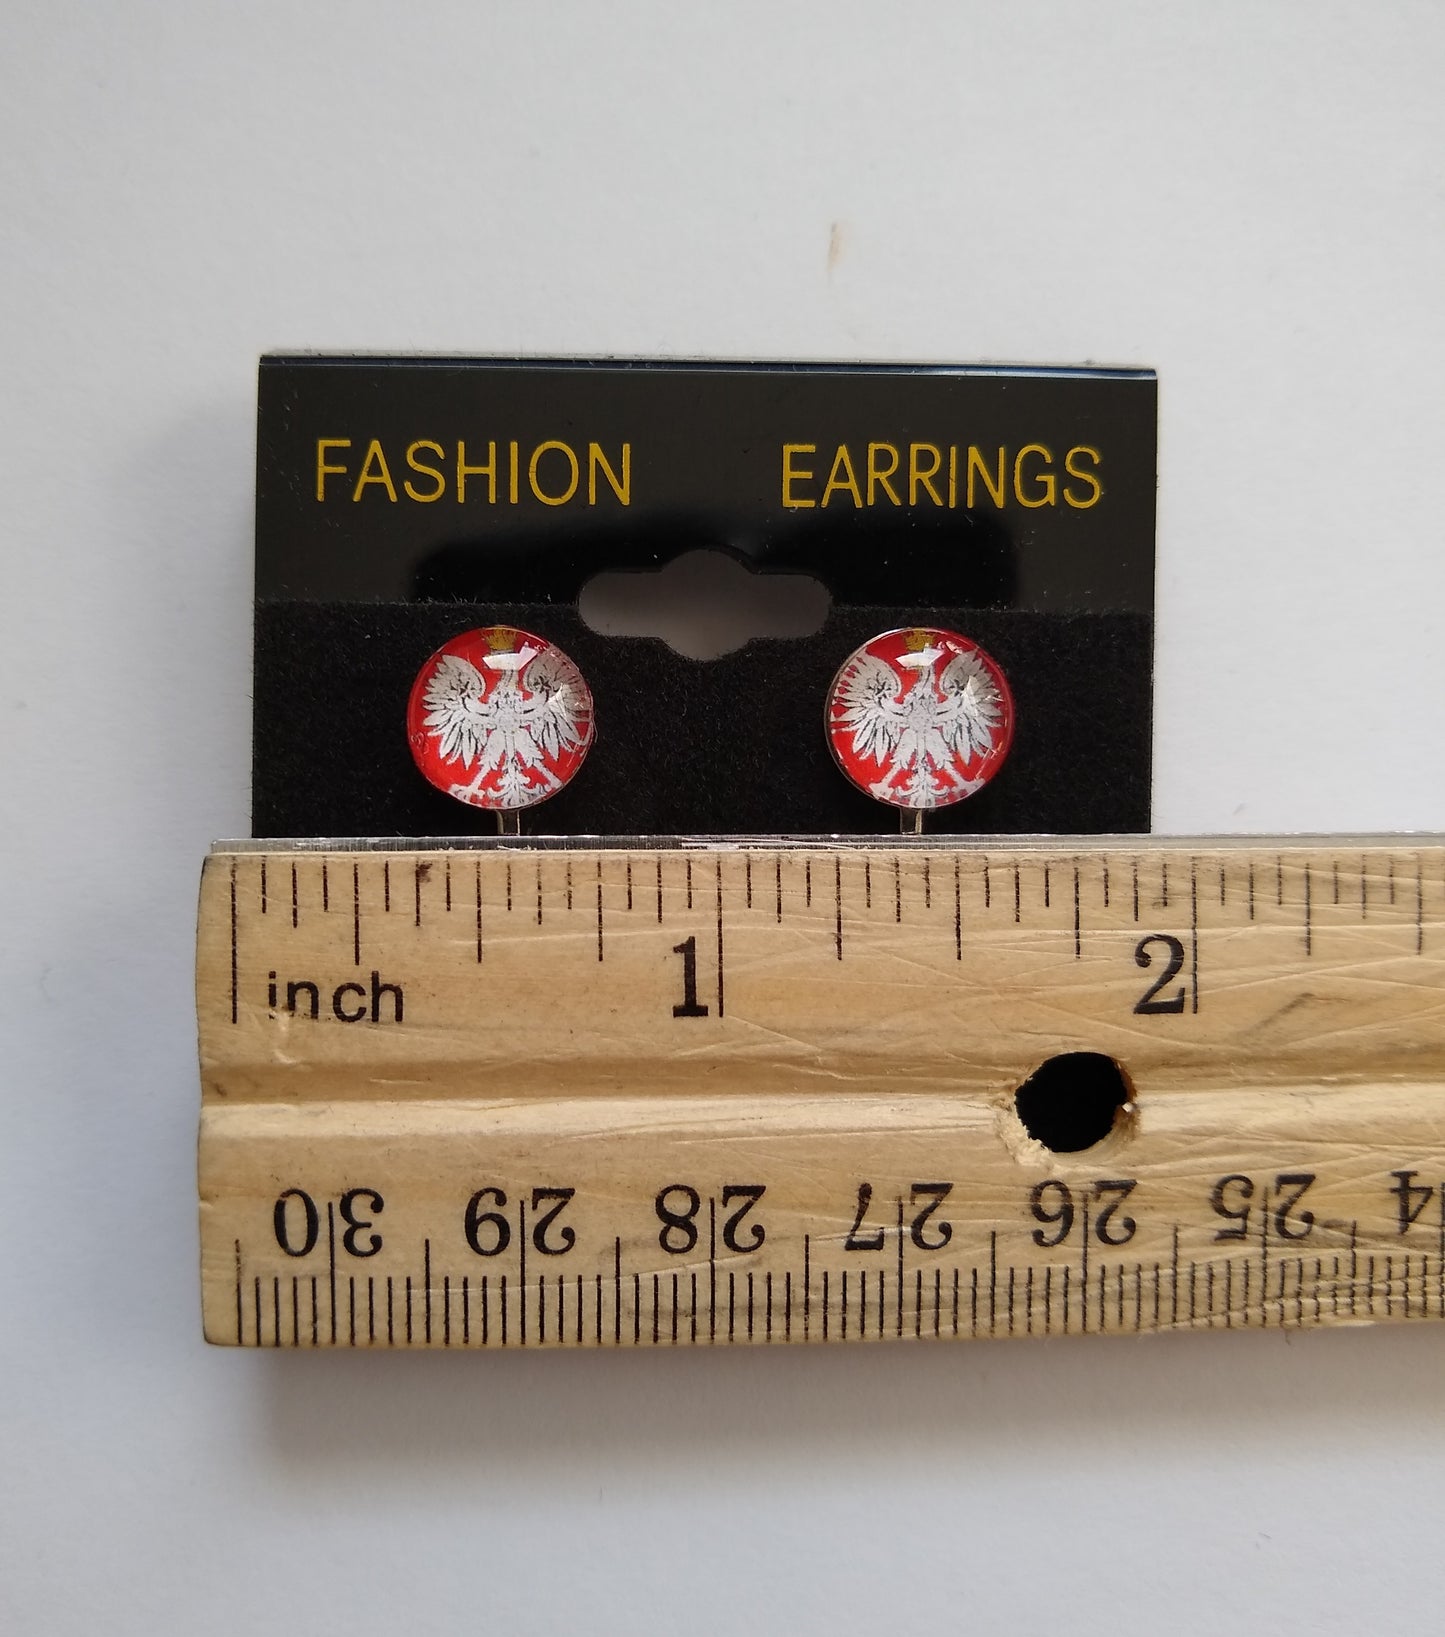 Clip Earrings with Polish Eagle with Crown. 10mm cabachon with a silver colored (not real silver) base. Ruler showing measurement of the cabachon. 